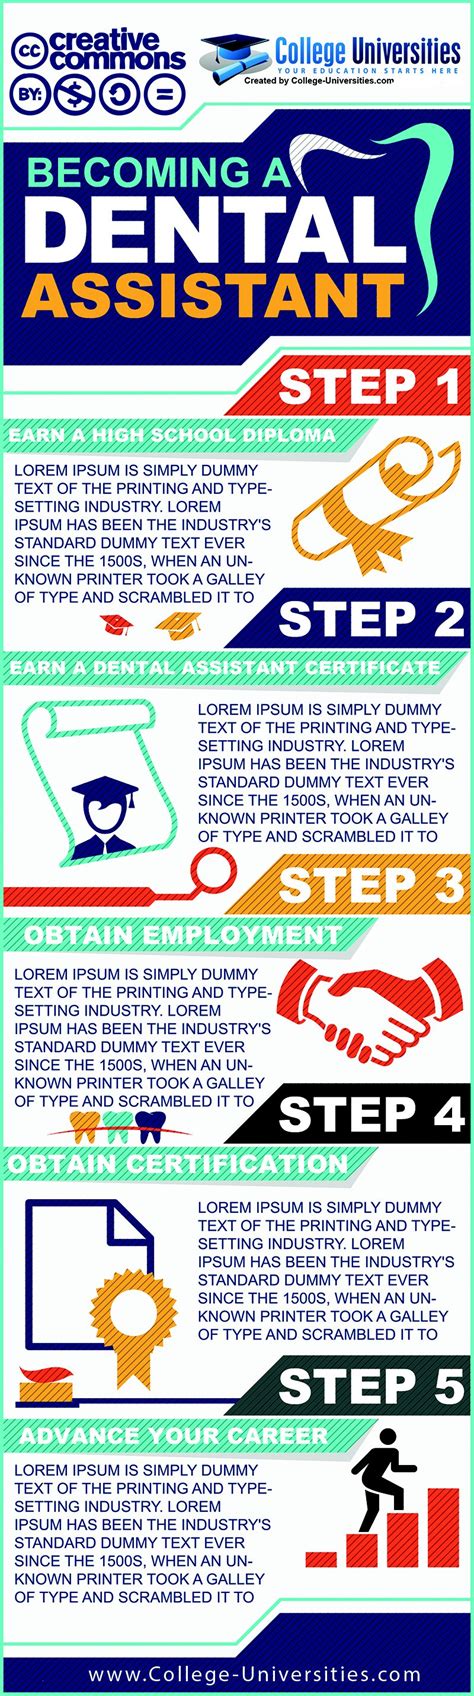 Becoming A Dental Assistant Infographic